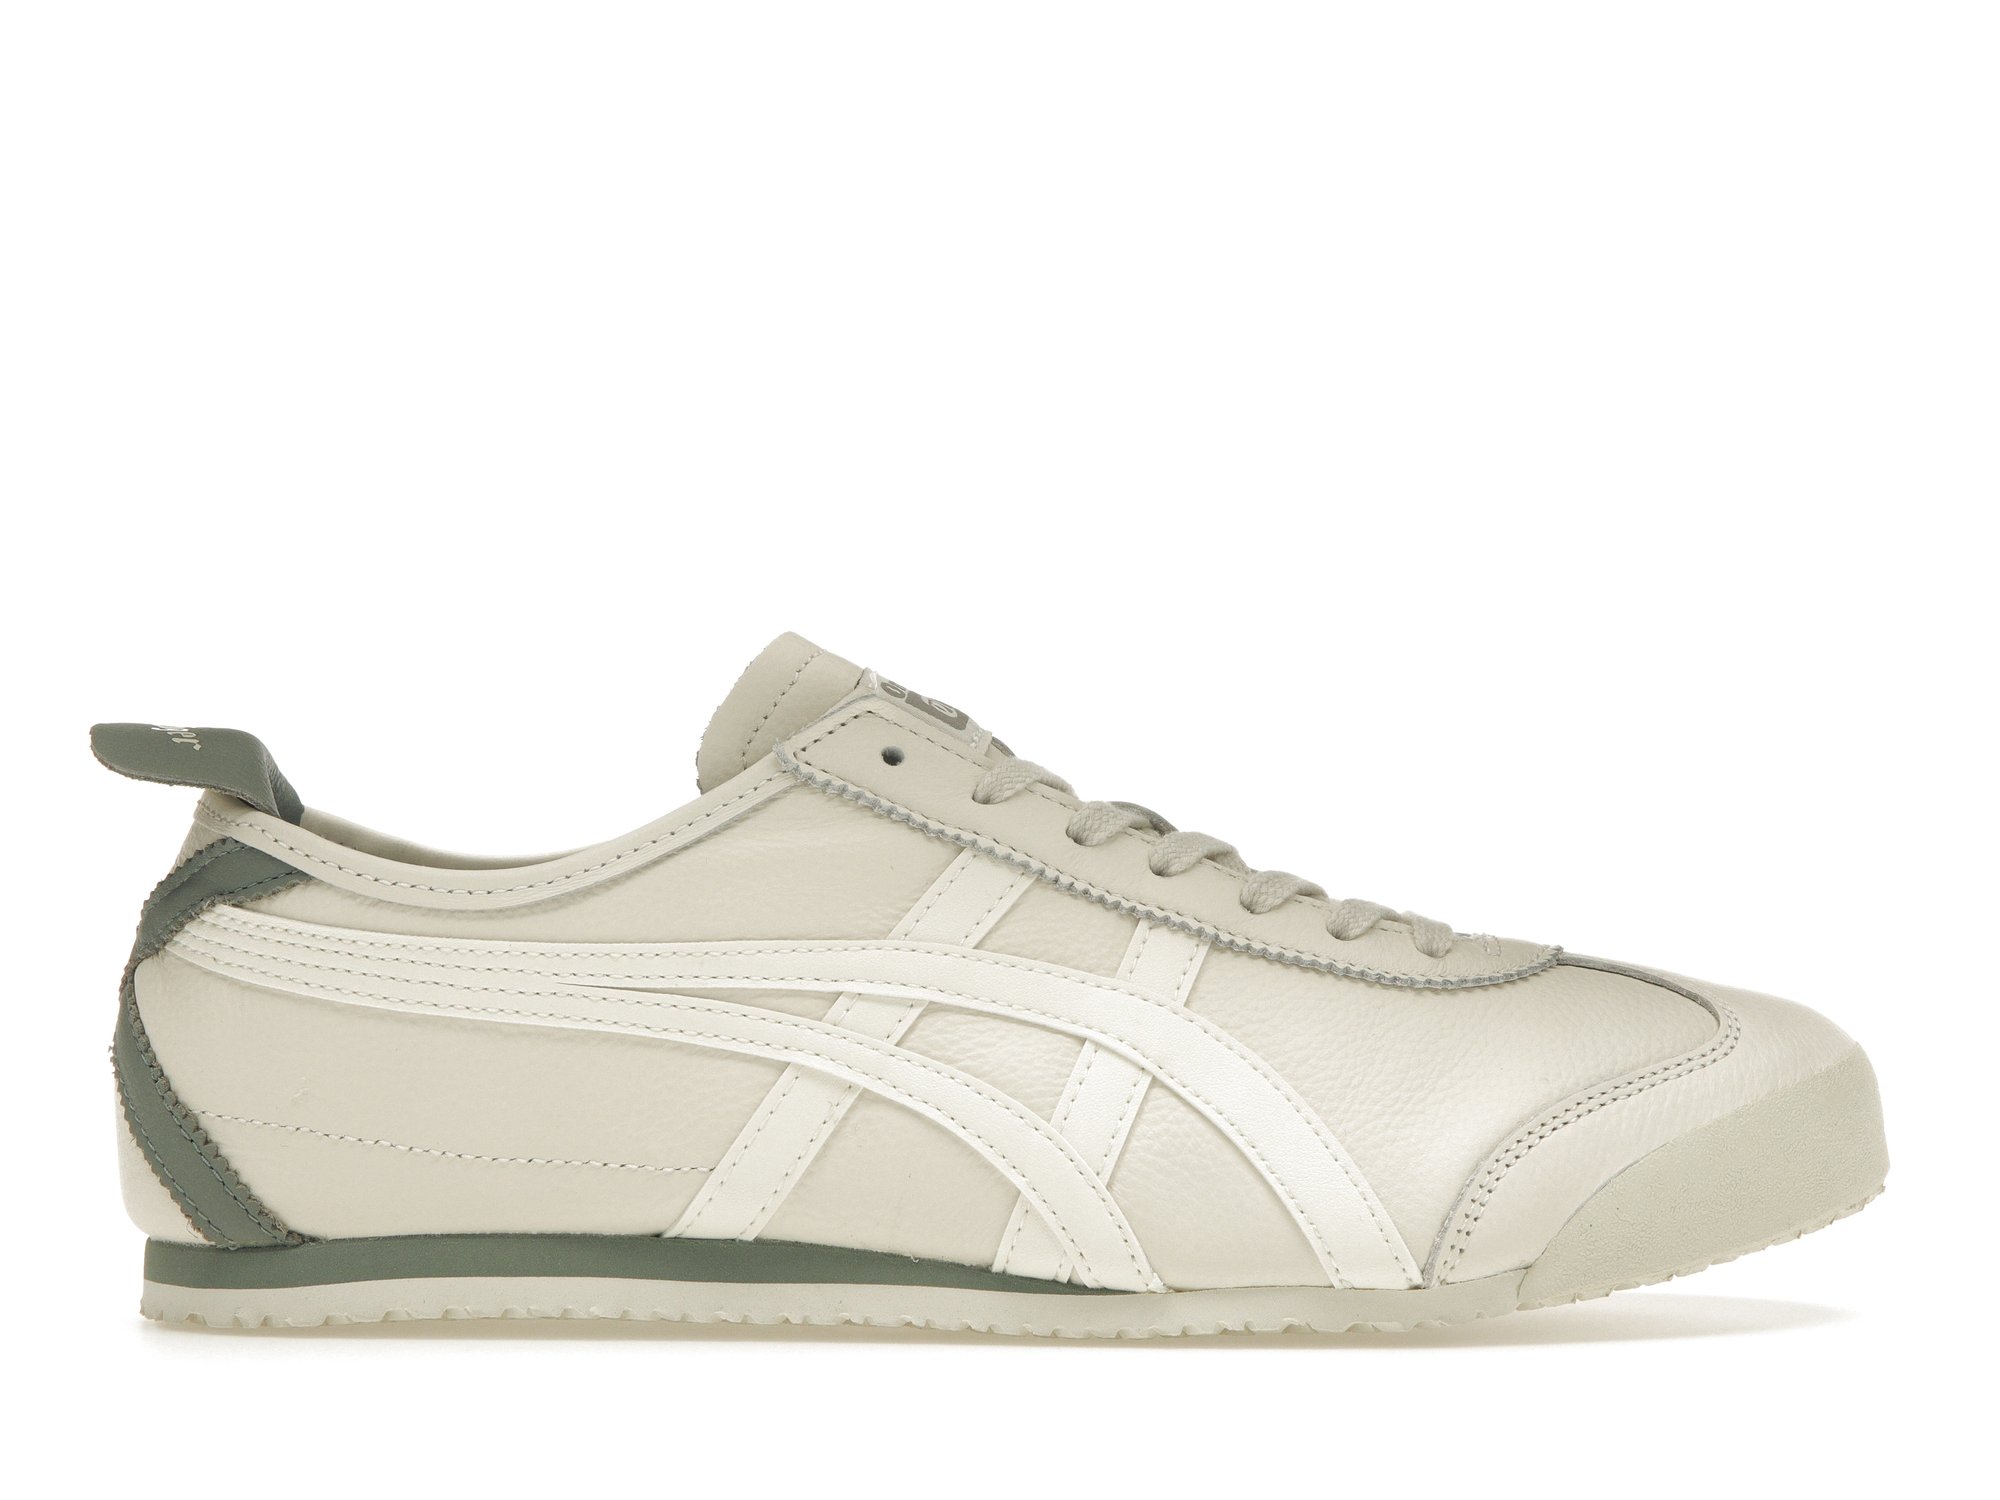 For something a little different - any love for Onitsuka Tiger? : r/Sneakers